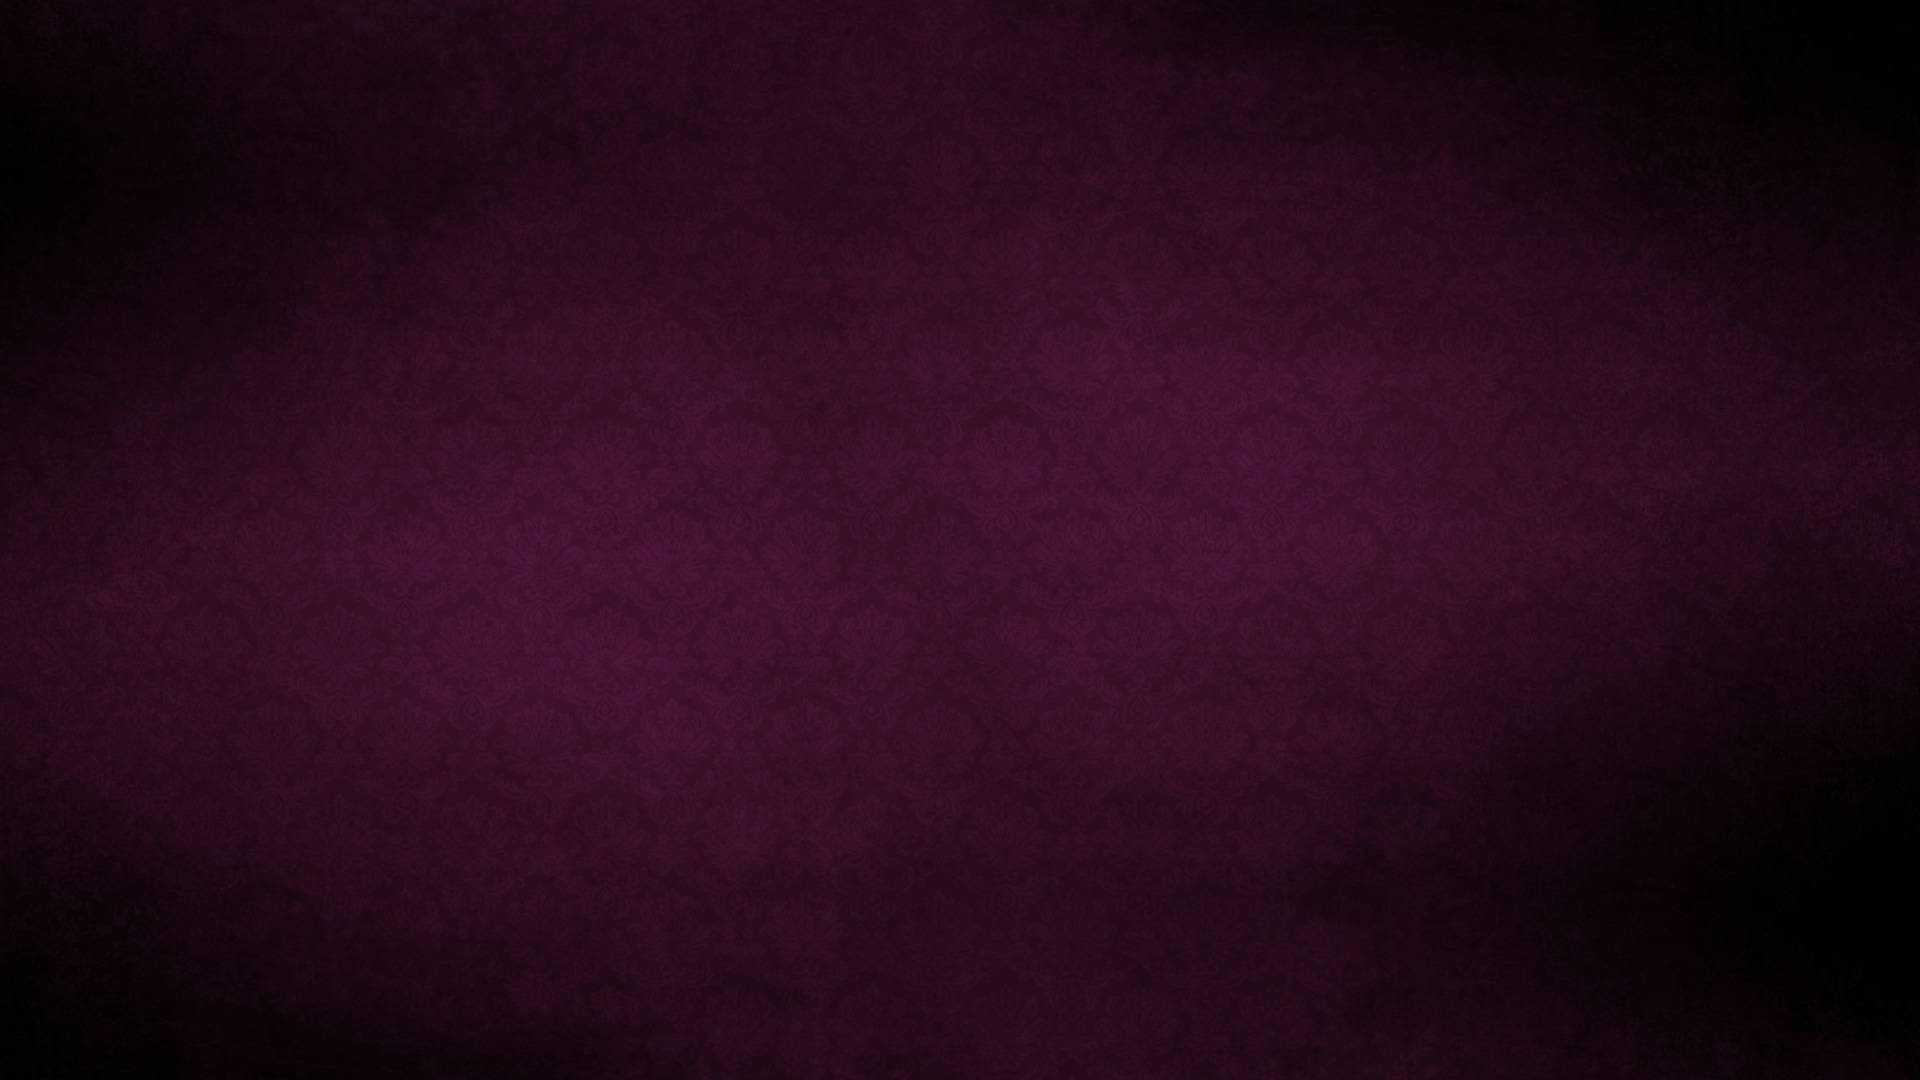 Plain 1920X1080 Wallpaper and Background Image